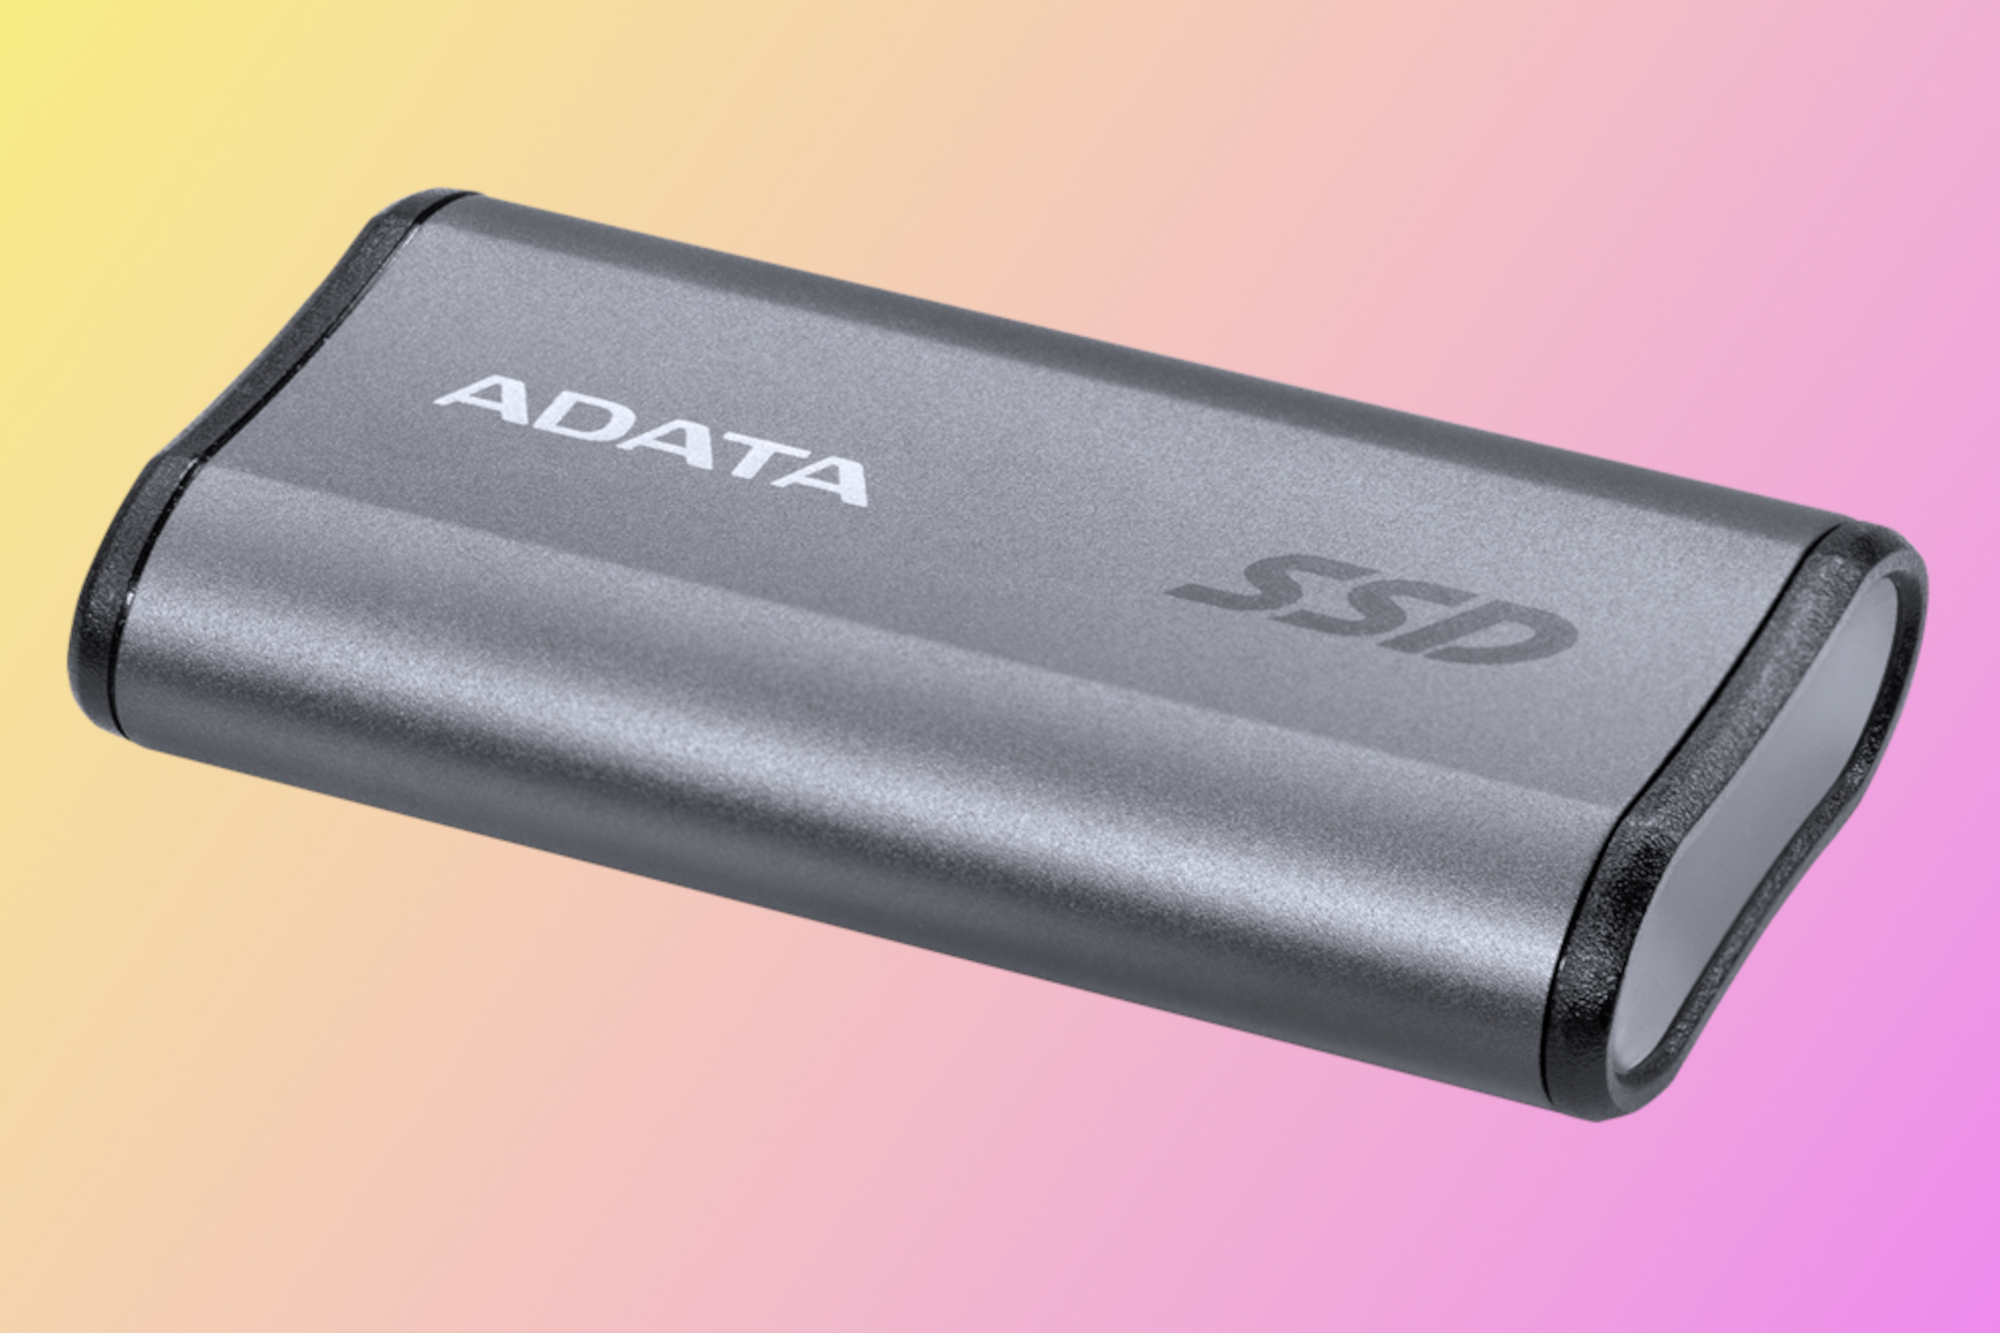 Adata Elite SE880 SSD - Most portable external SSD for gaming